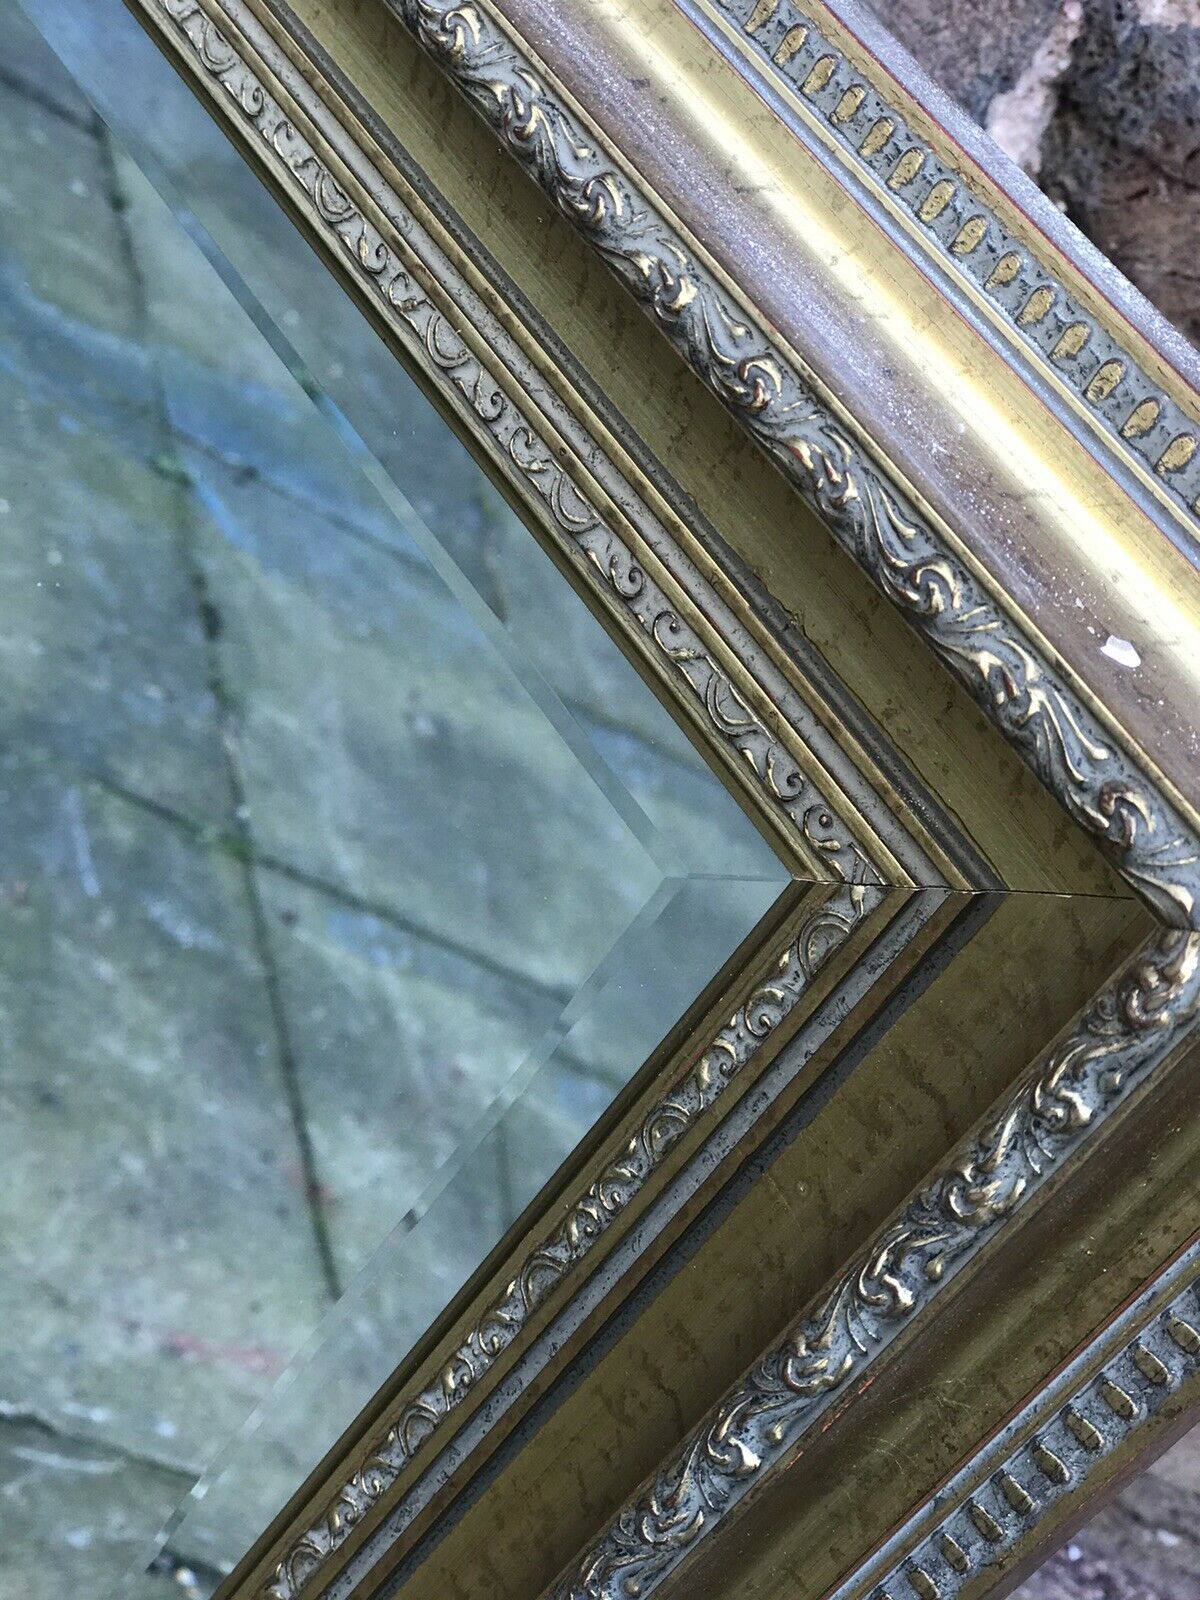 Large Mirror In a Wooden Gold Gilt Frame